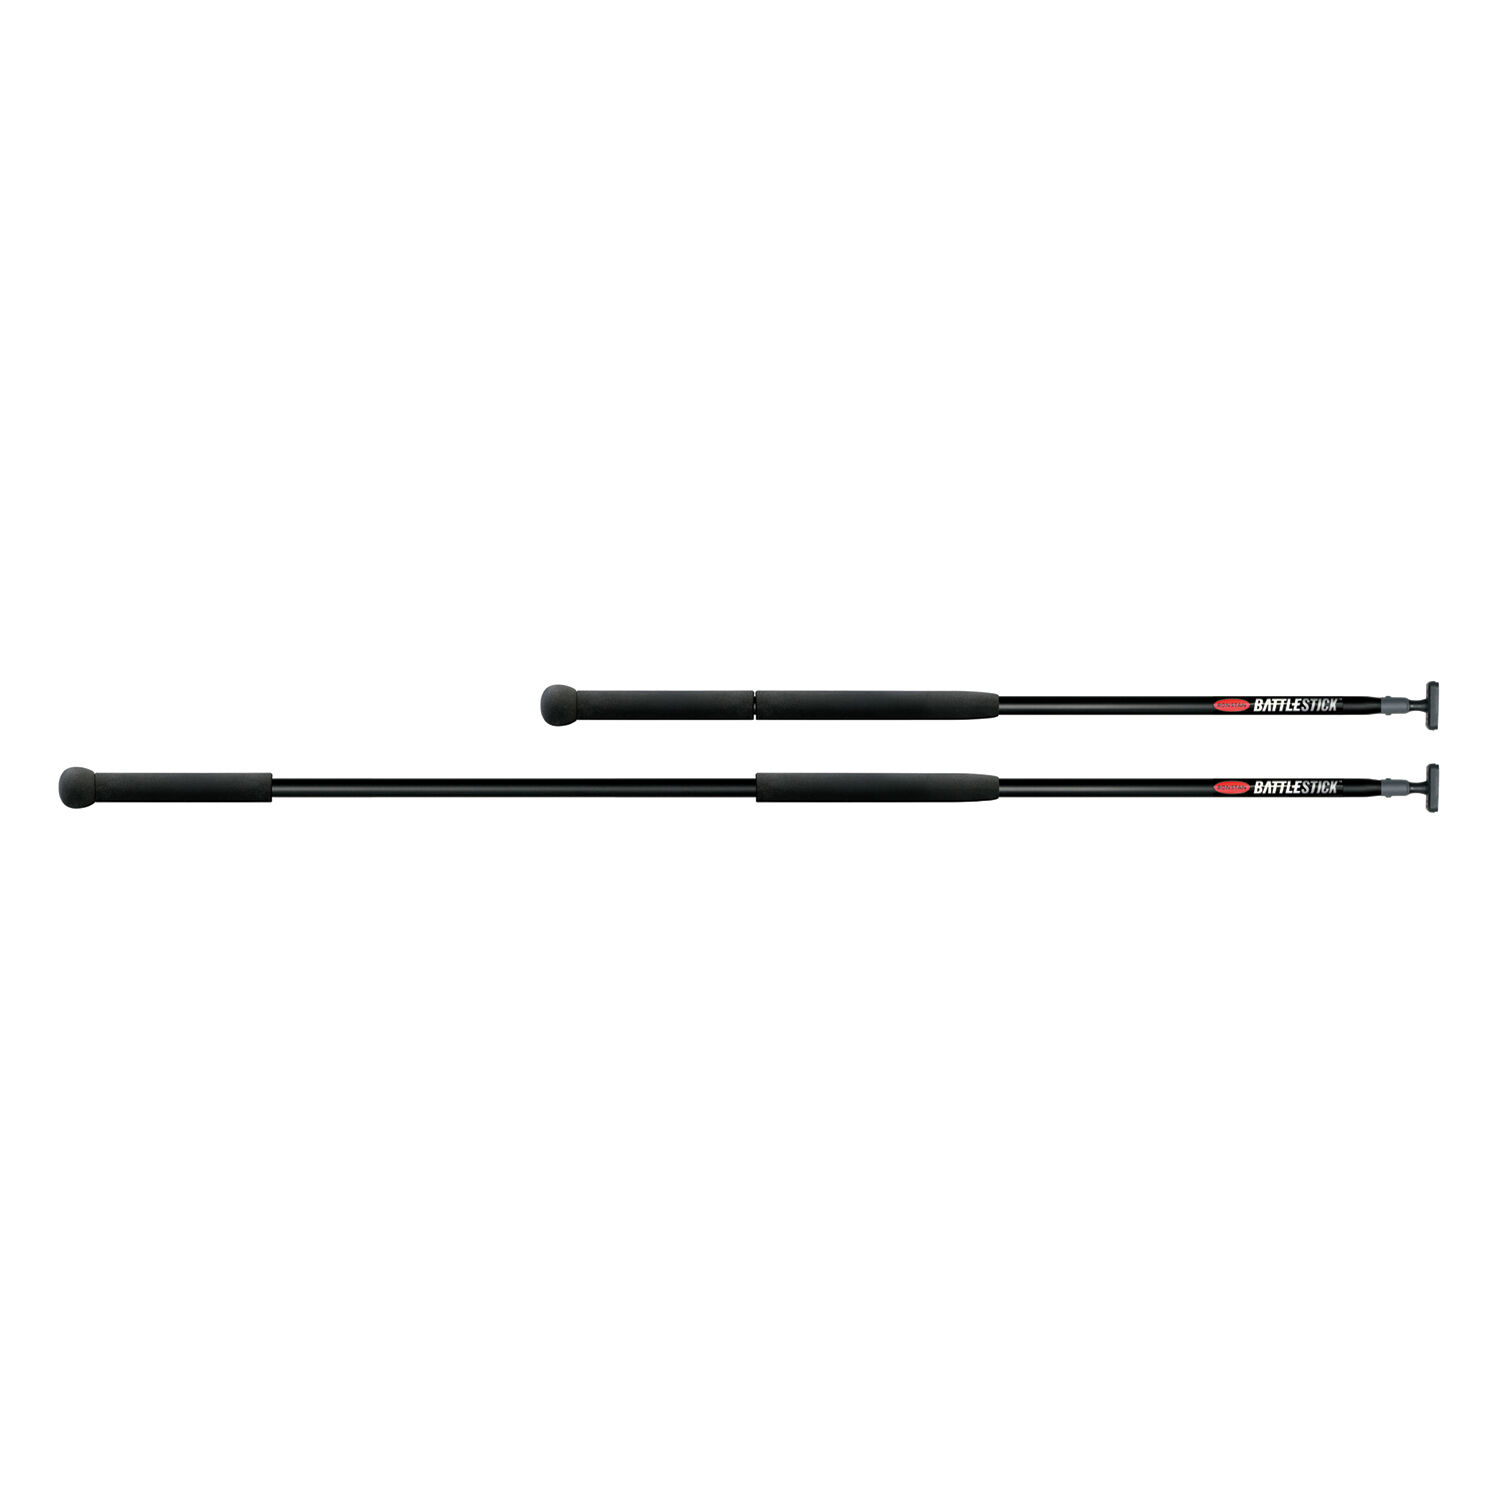 2 x 48" Long Black Rod Cloth Bags for Telescopic Fishing Rods or Whips  Free P&P 